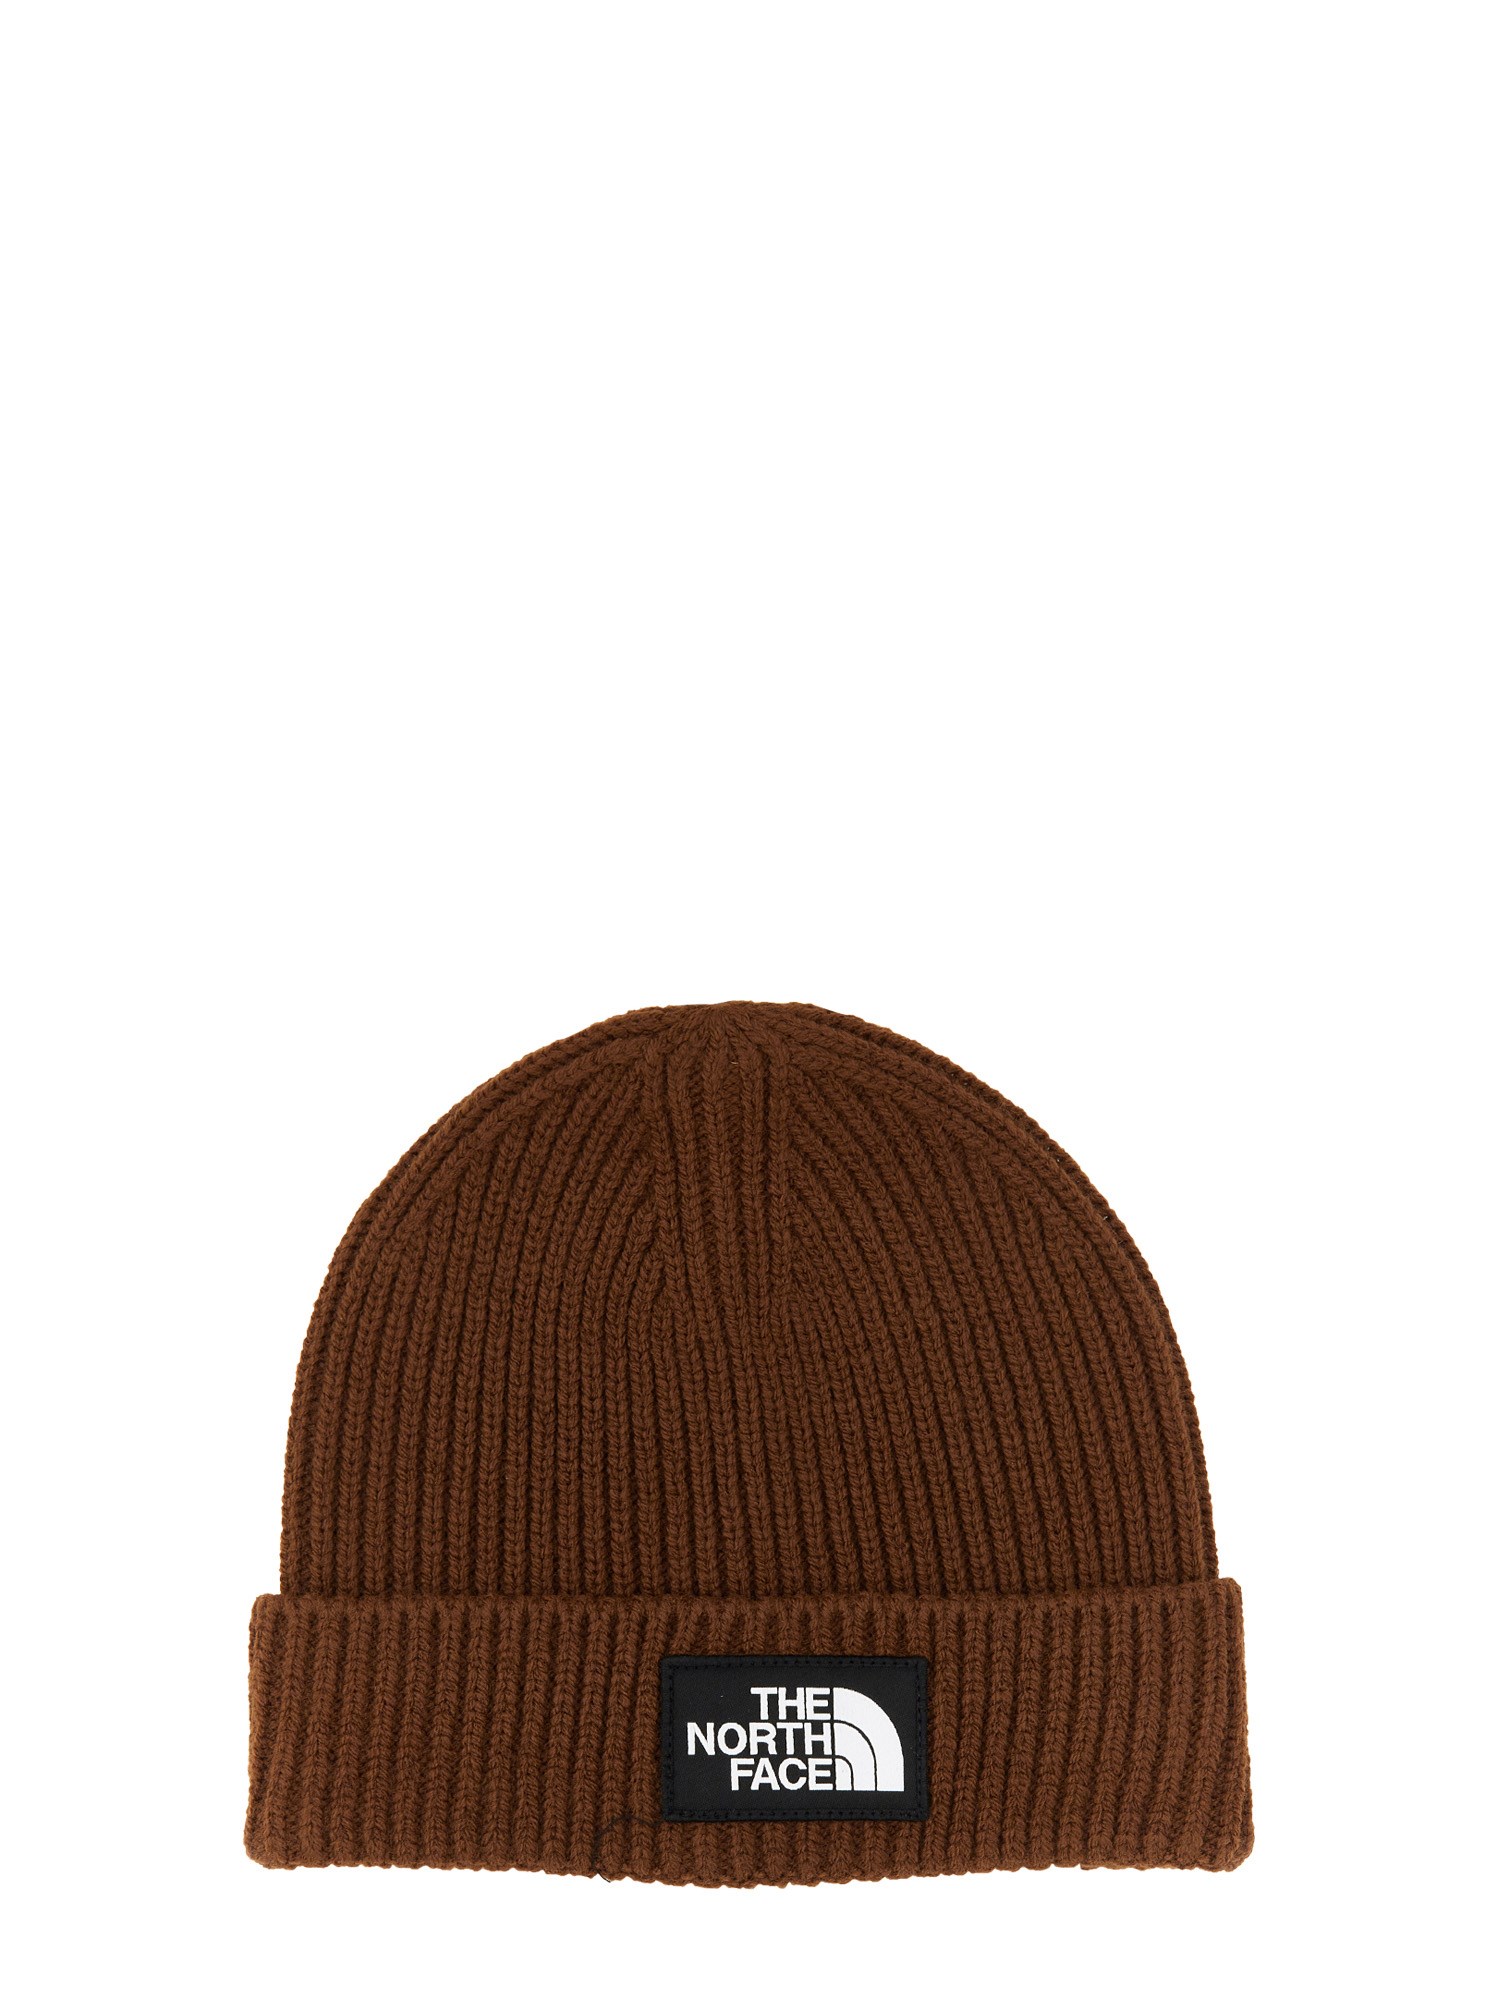 THE NORTH FACE BEANIE HAT